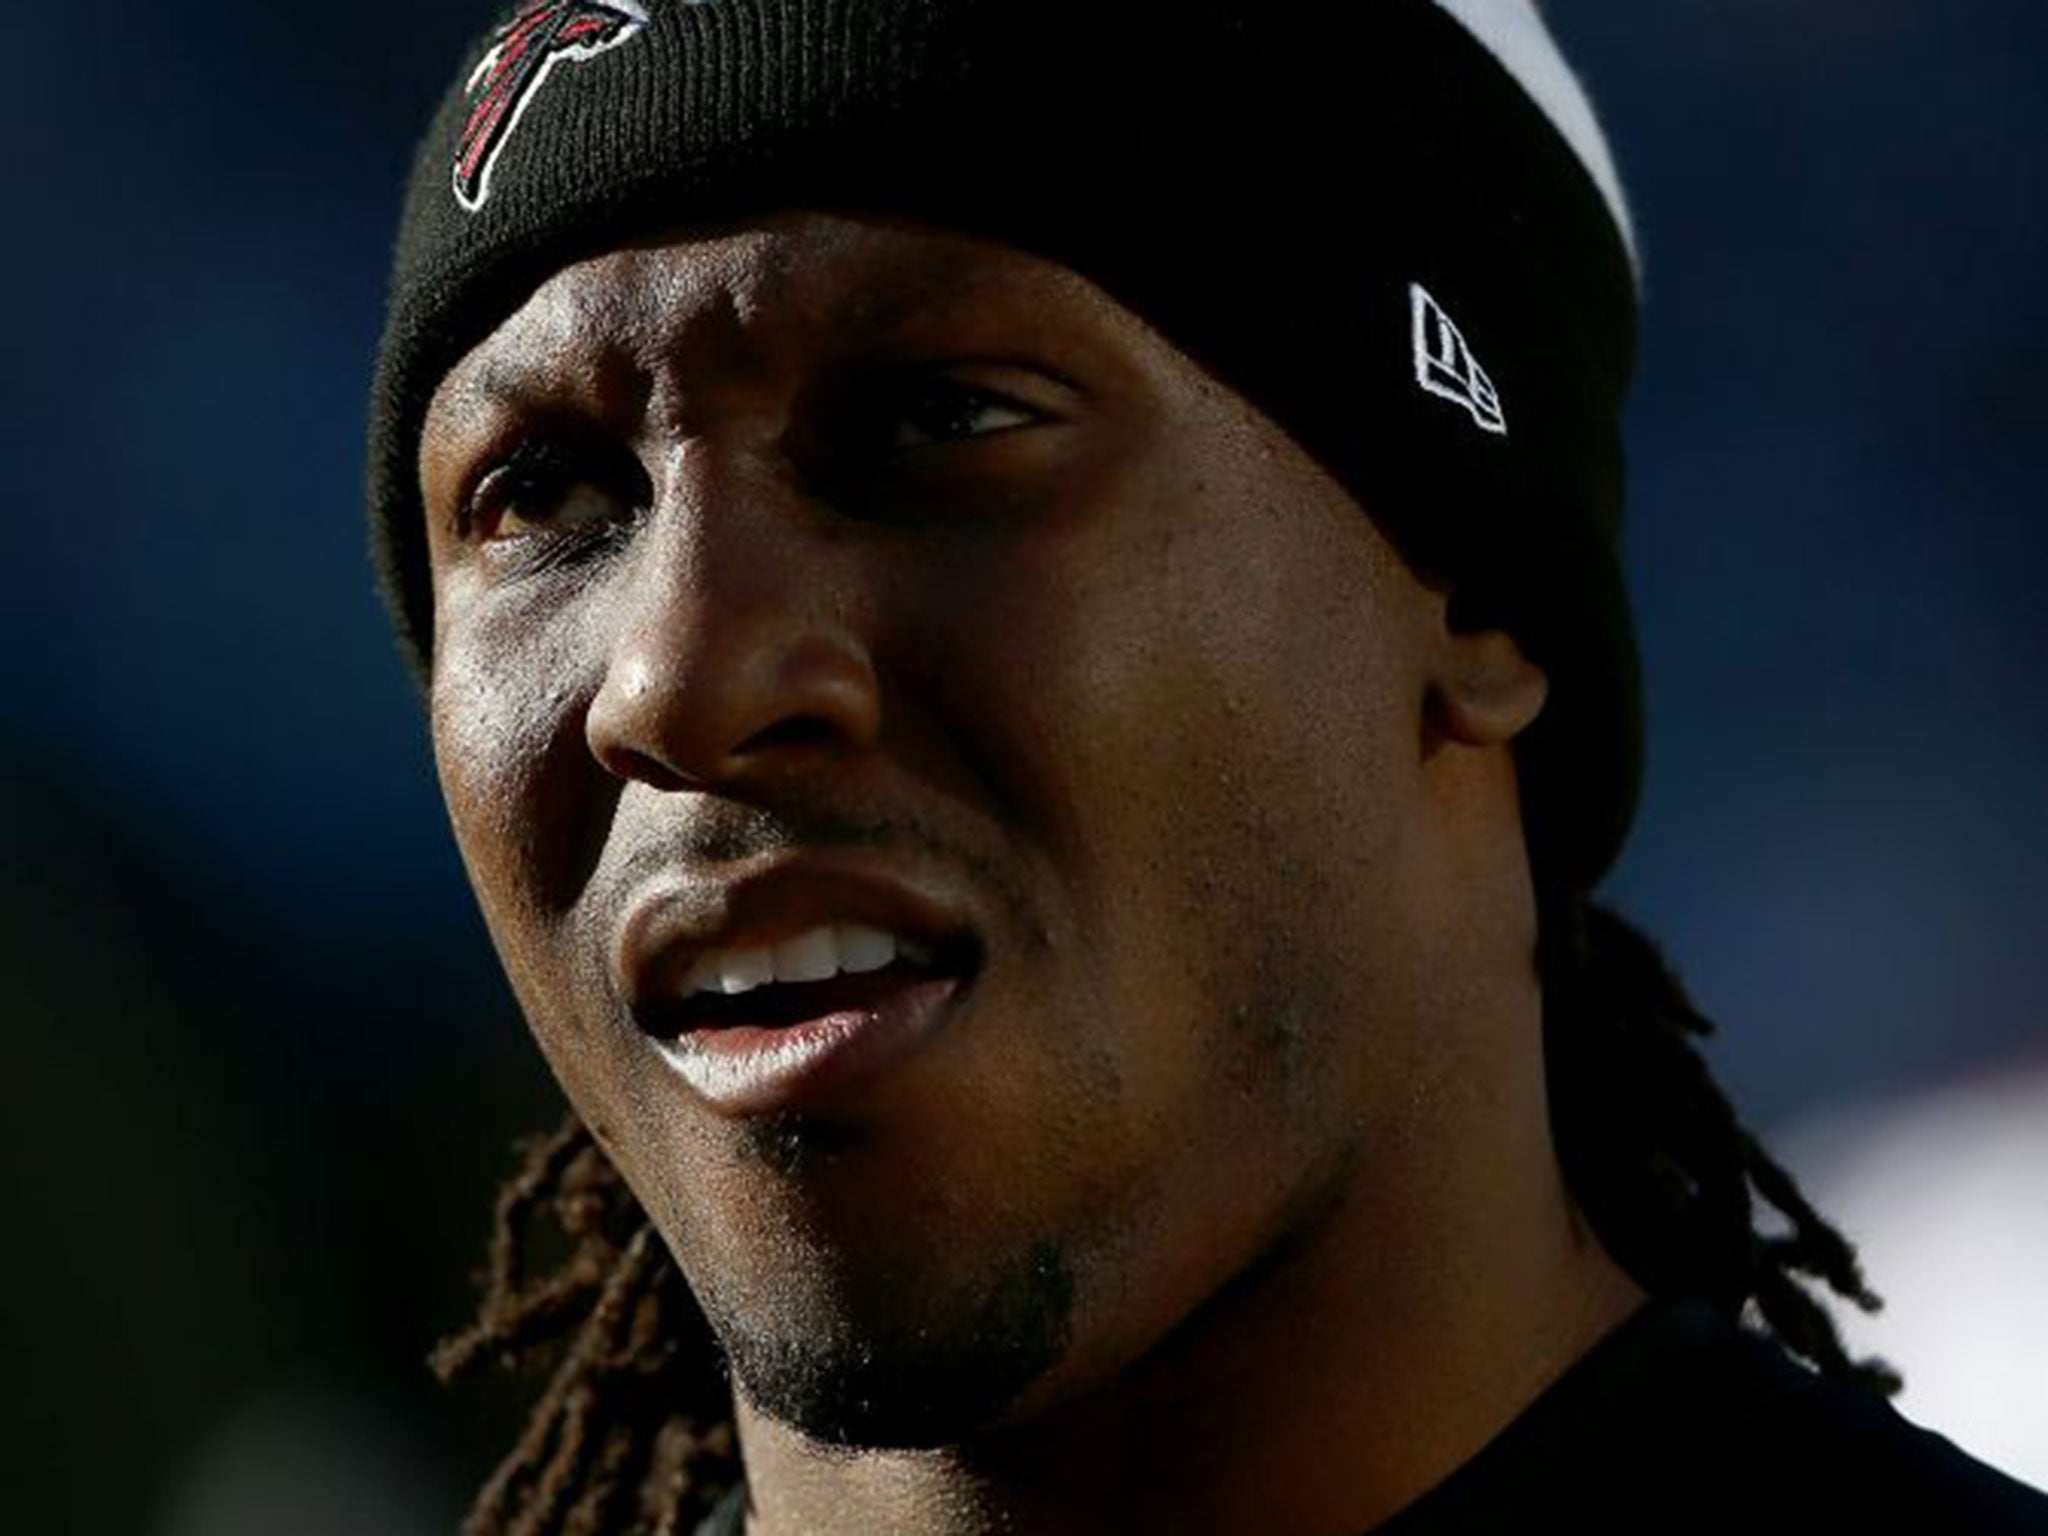 Wide Receiver for the Atlanta Falcons, Roddy White, is one of the stars of this season's 'Hard Knocks' on Channel 4